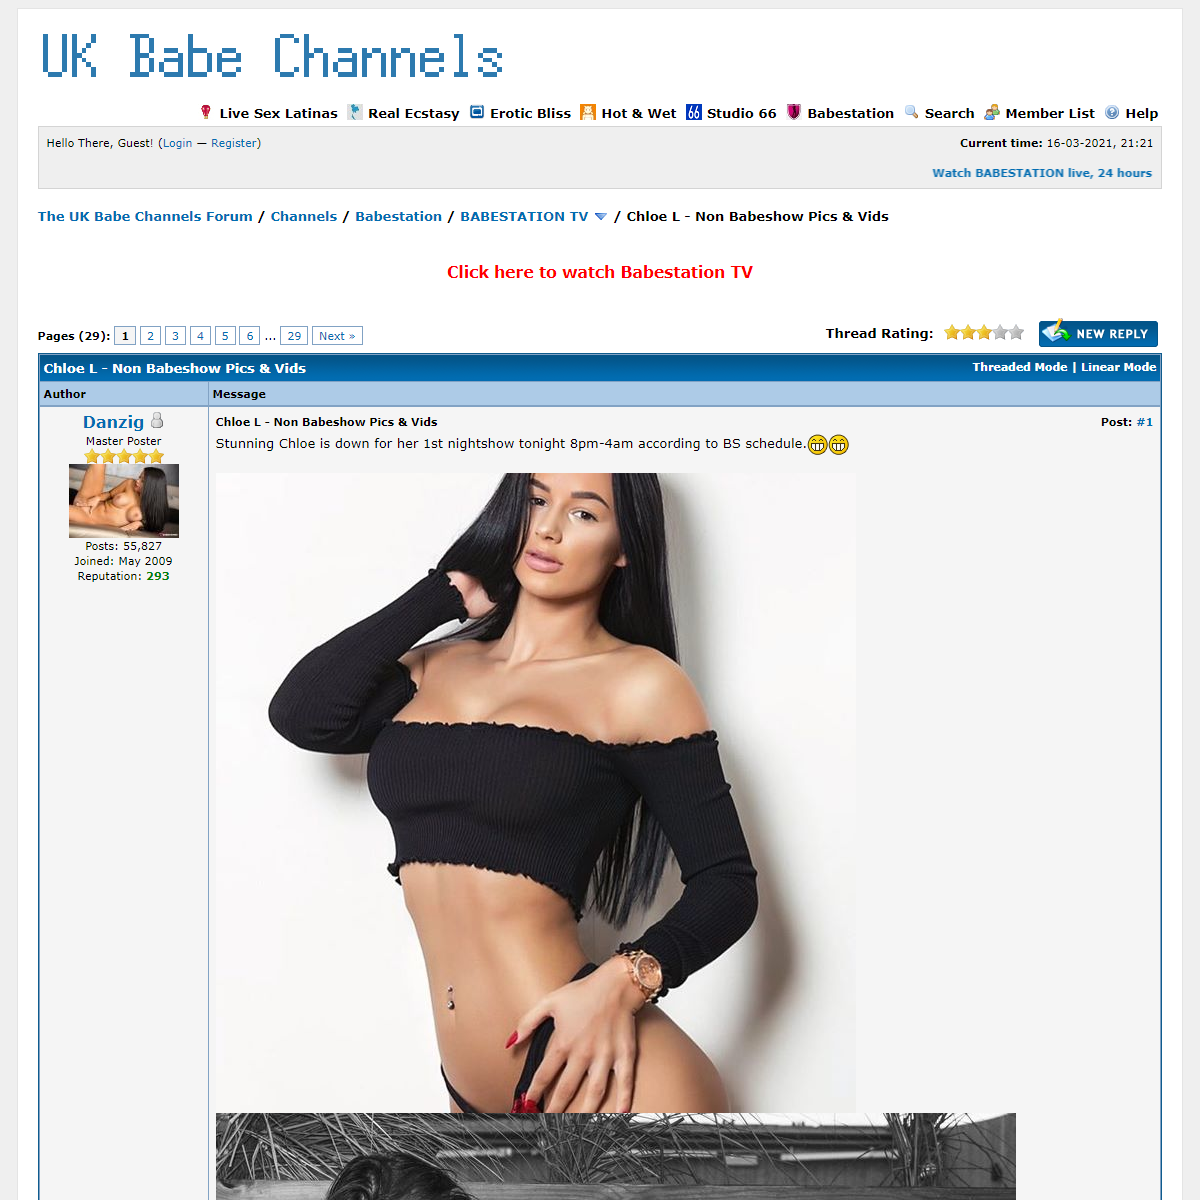 A complete backup of https://www.babeshows.co.uk/showthread.php?tid=77710